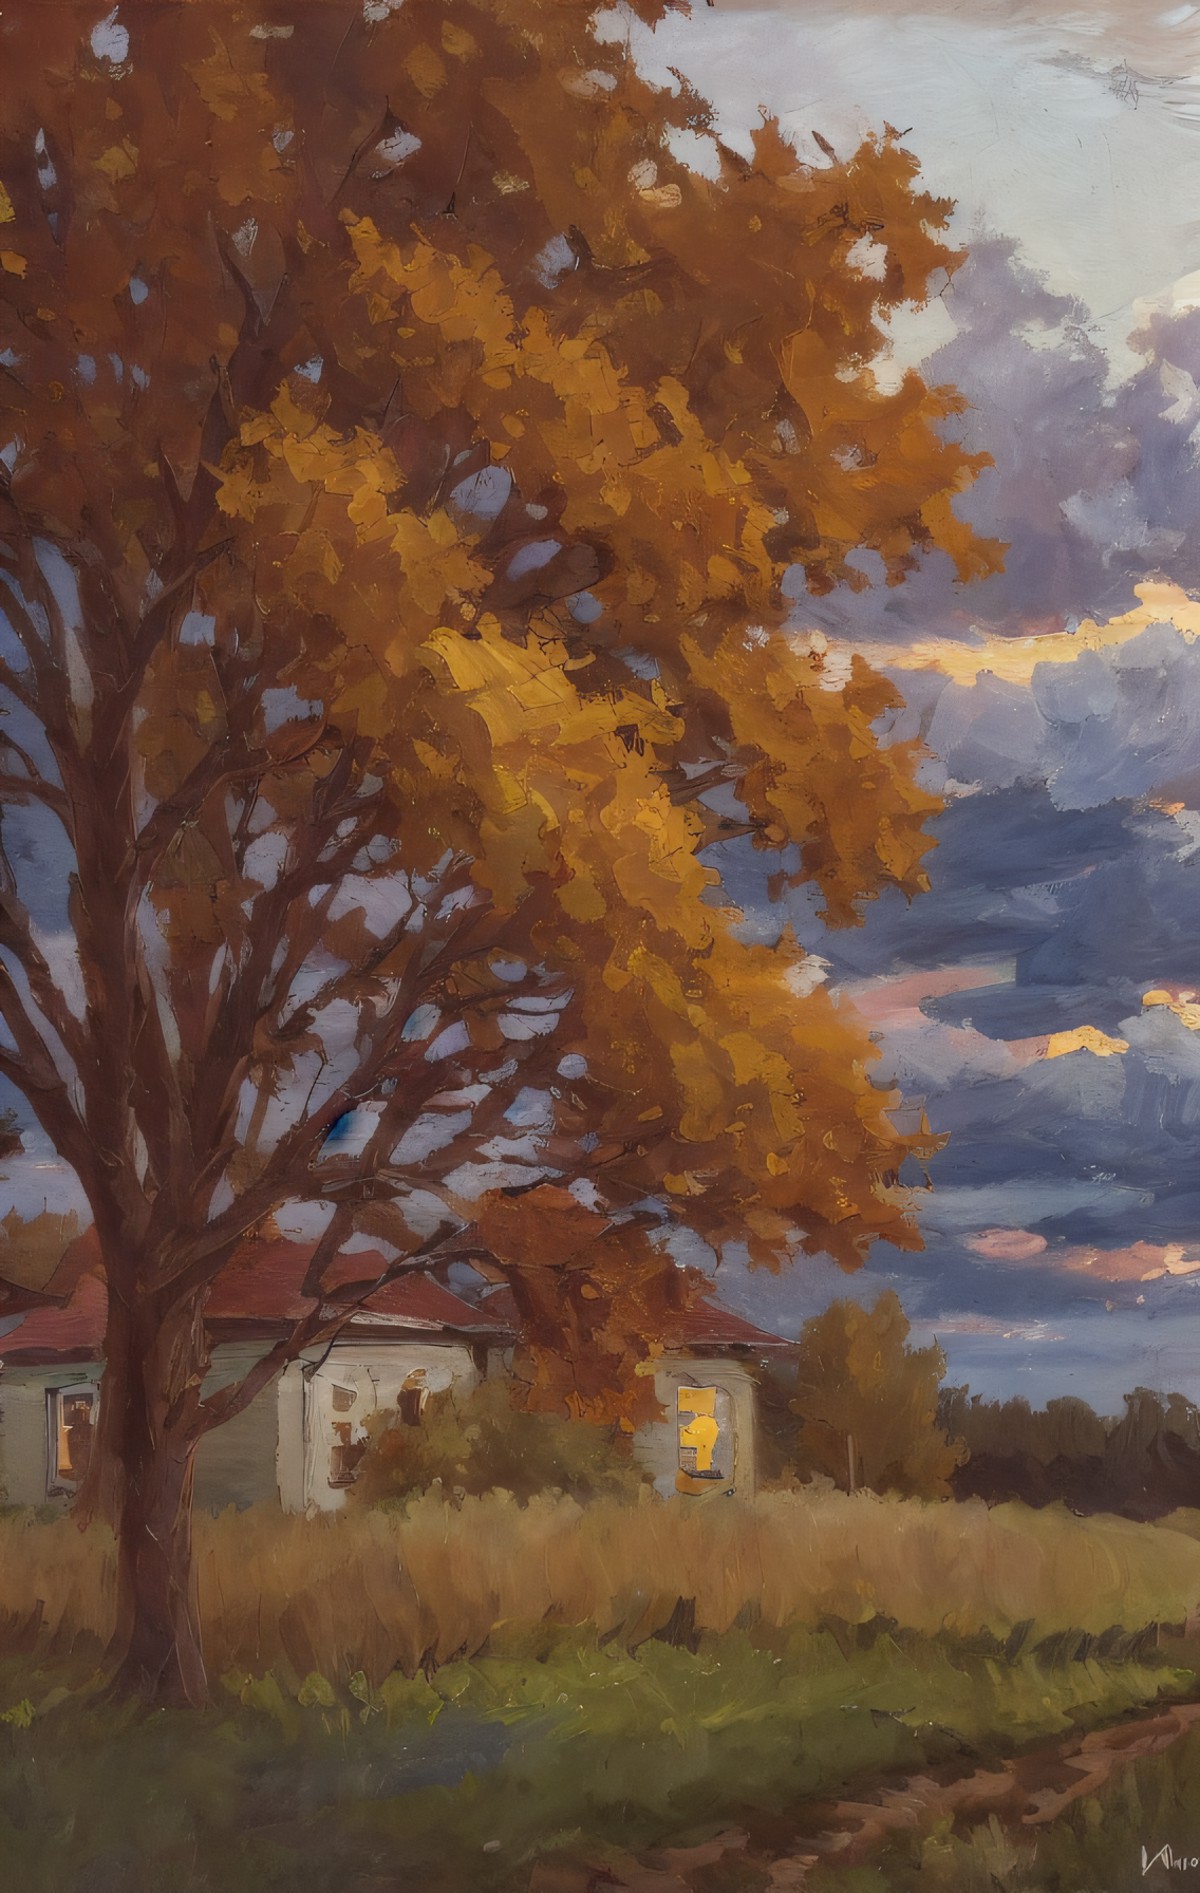 (a painting by mse) blue hour, fall, smooth, aesthetic, house in a field, clouds, a dirt path leading to the house,